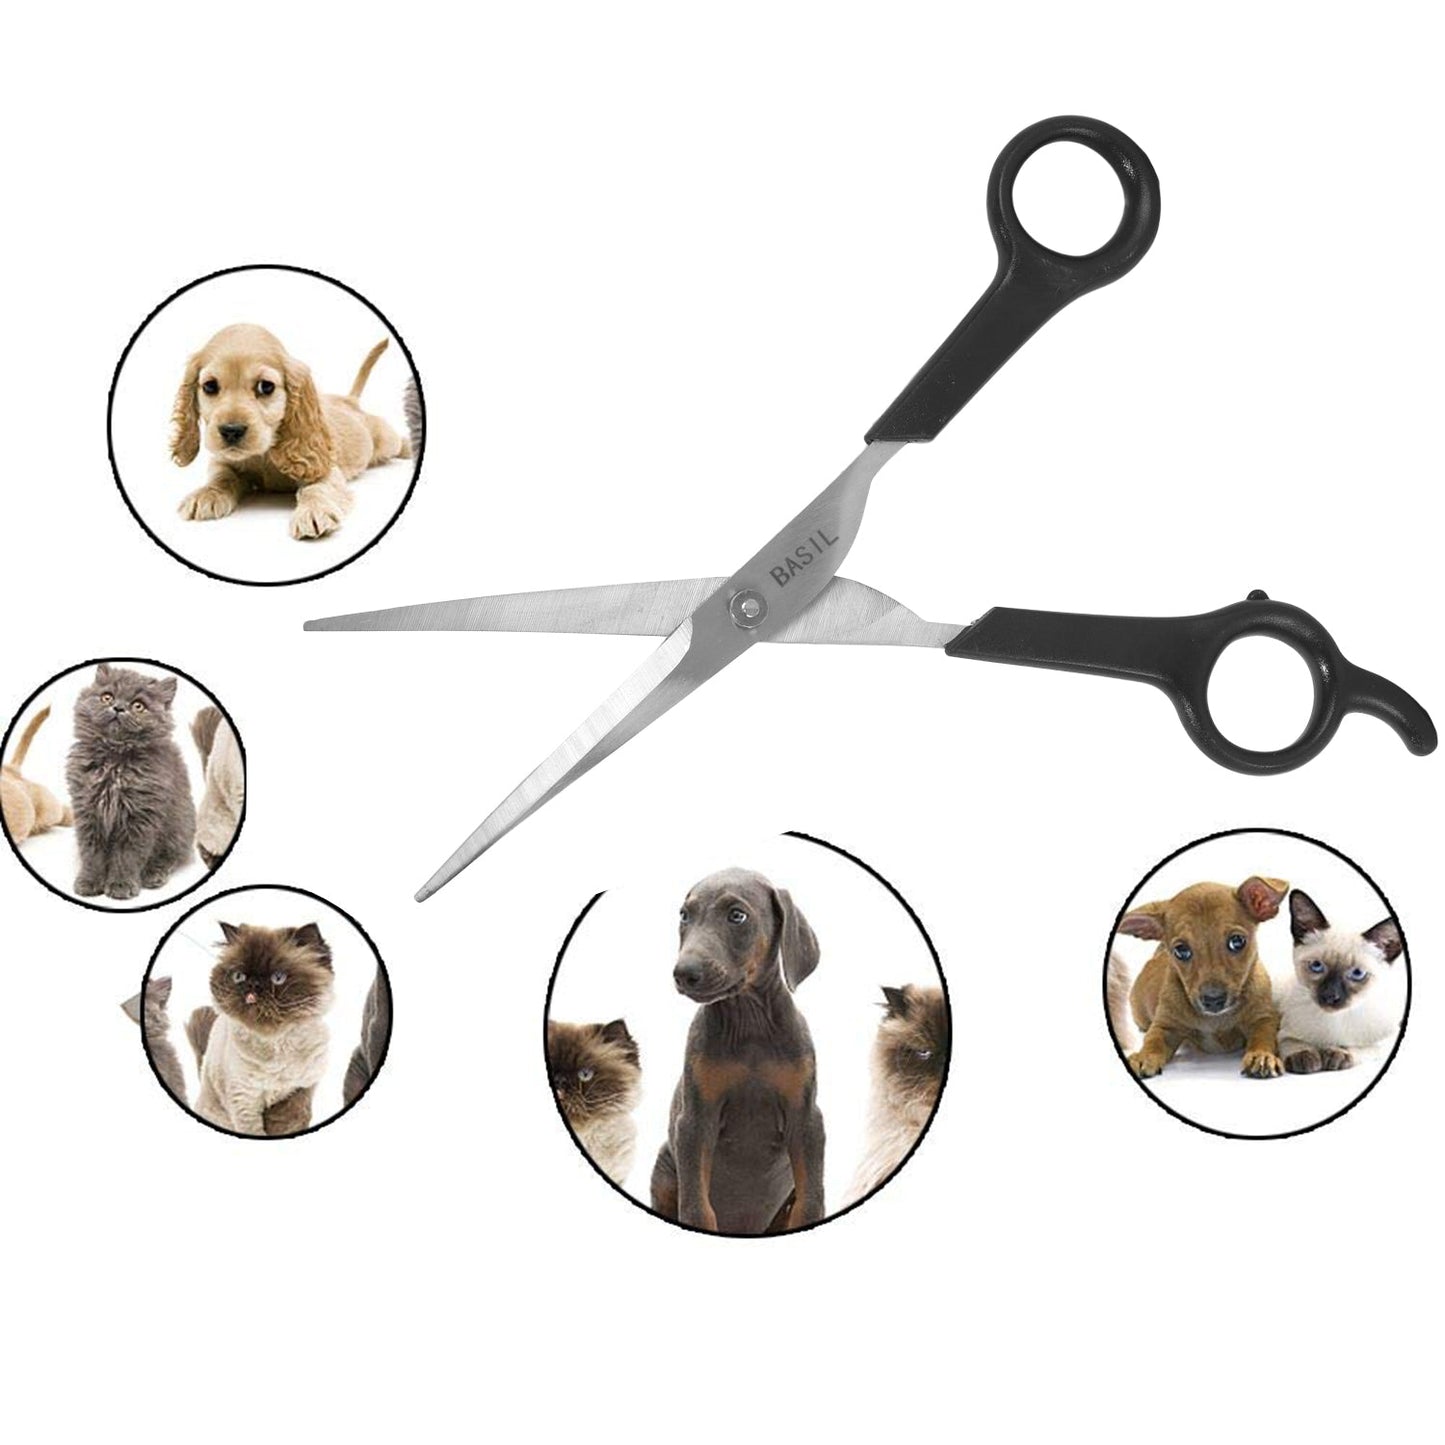 Basil Curved Shaped Scissor for Dogs & Cats